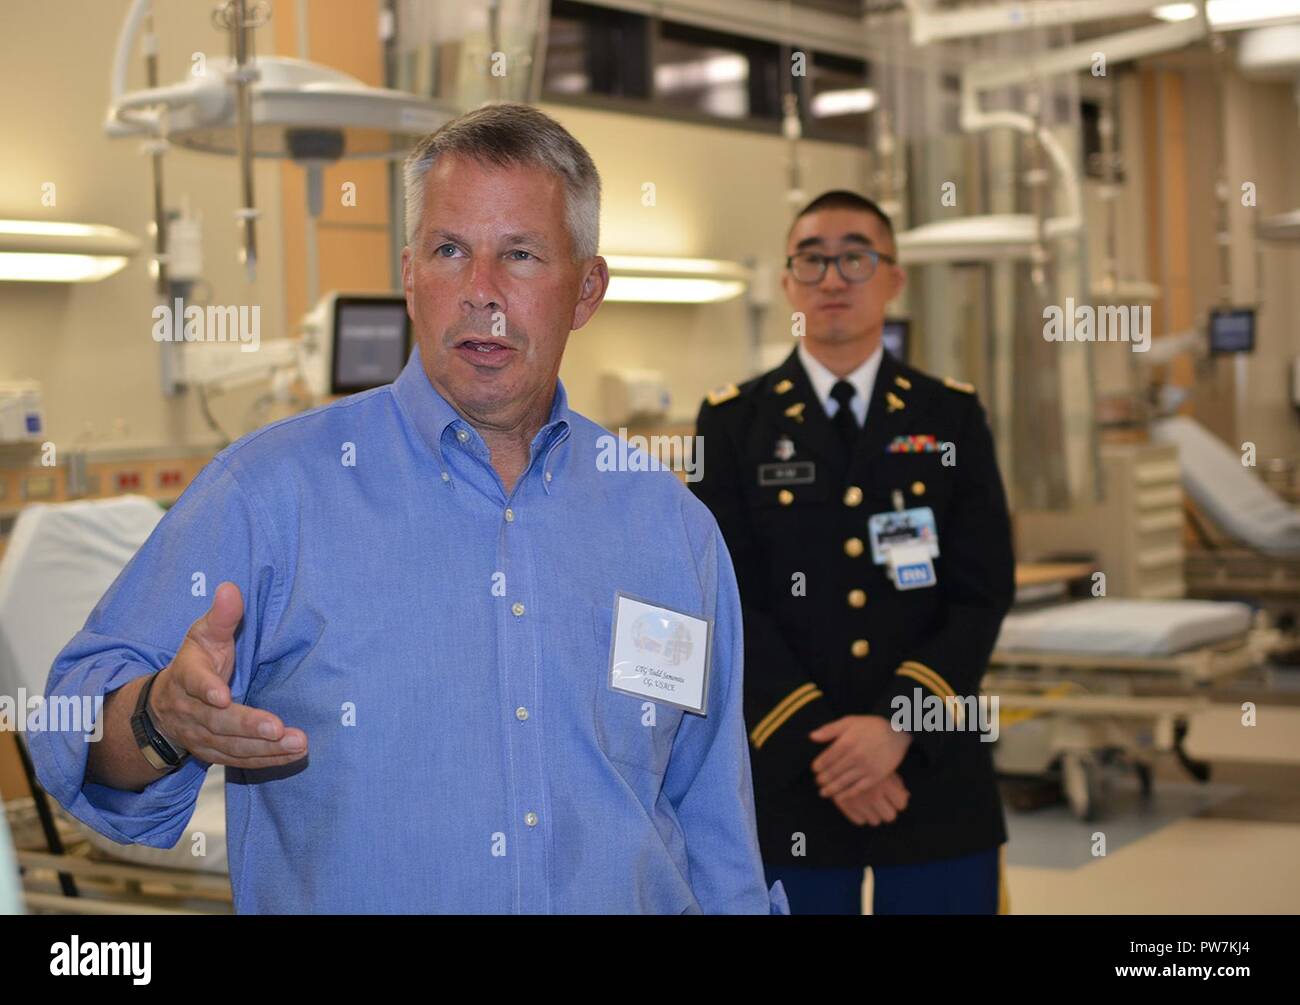 Lt. Gen. Todd Semonite, commanding general, U.S. Army Corps of Engineers, left, asks a question during a Sept. 20 tour of the new Weed Army Community Hospital at Fort Irwin, California. Stock Photo